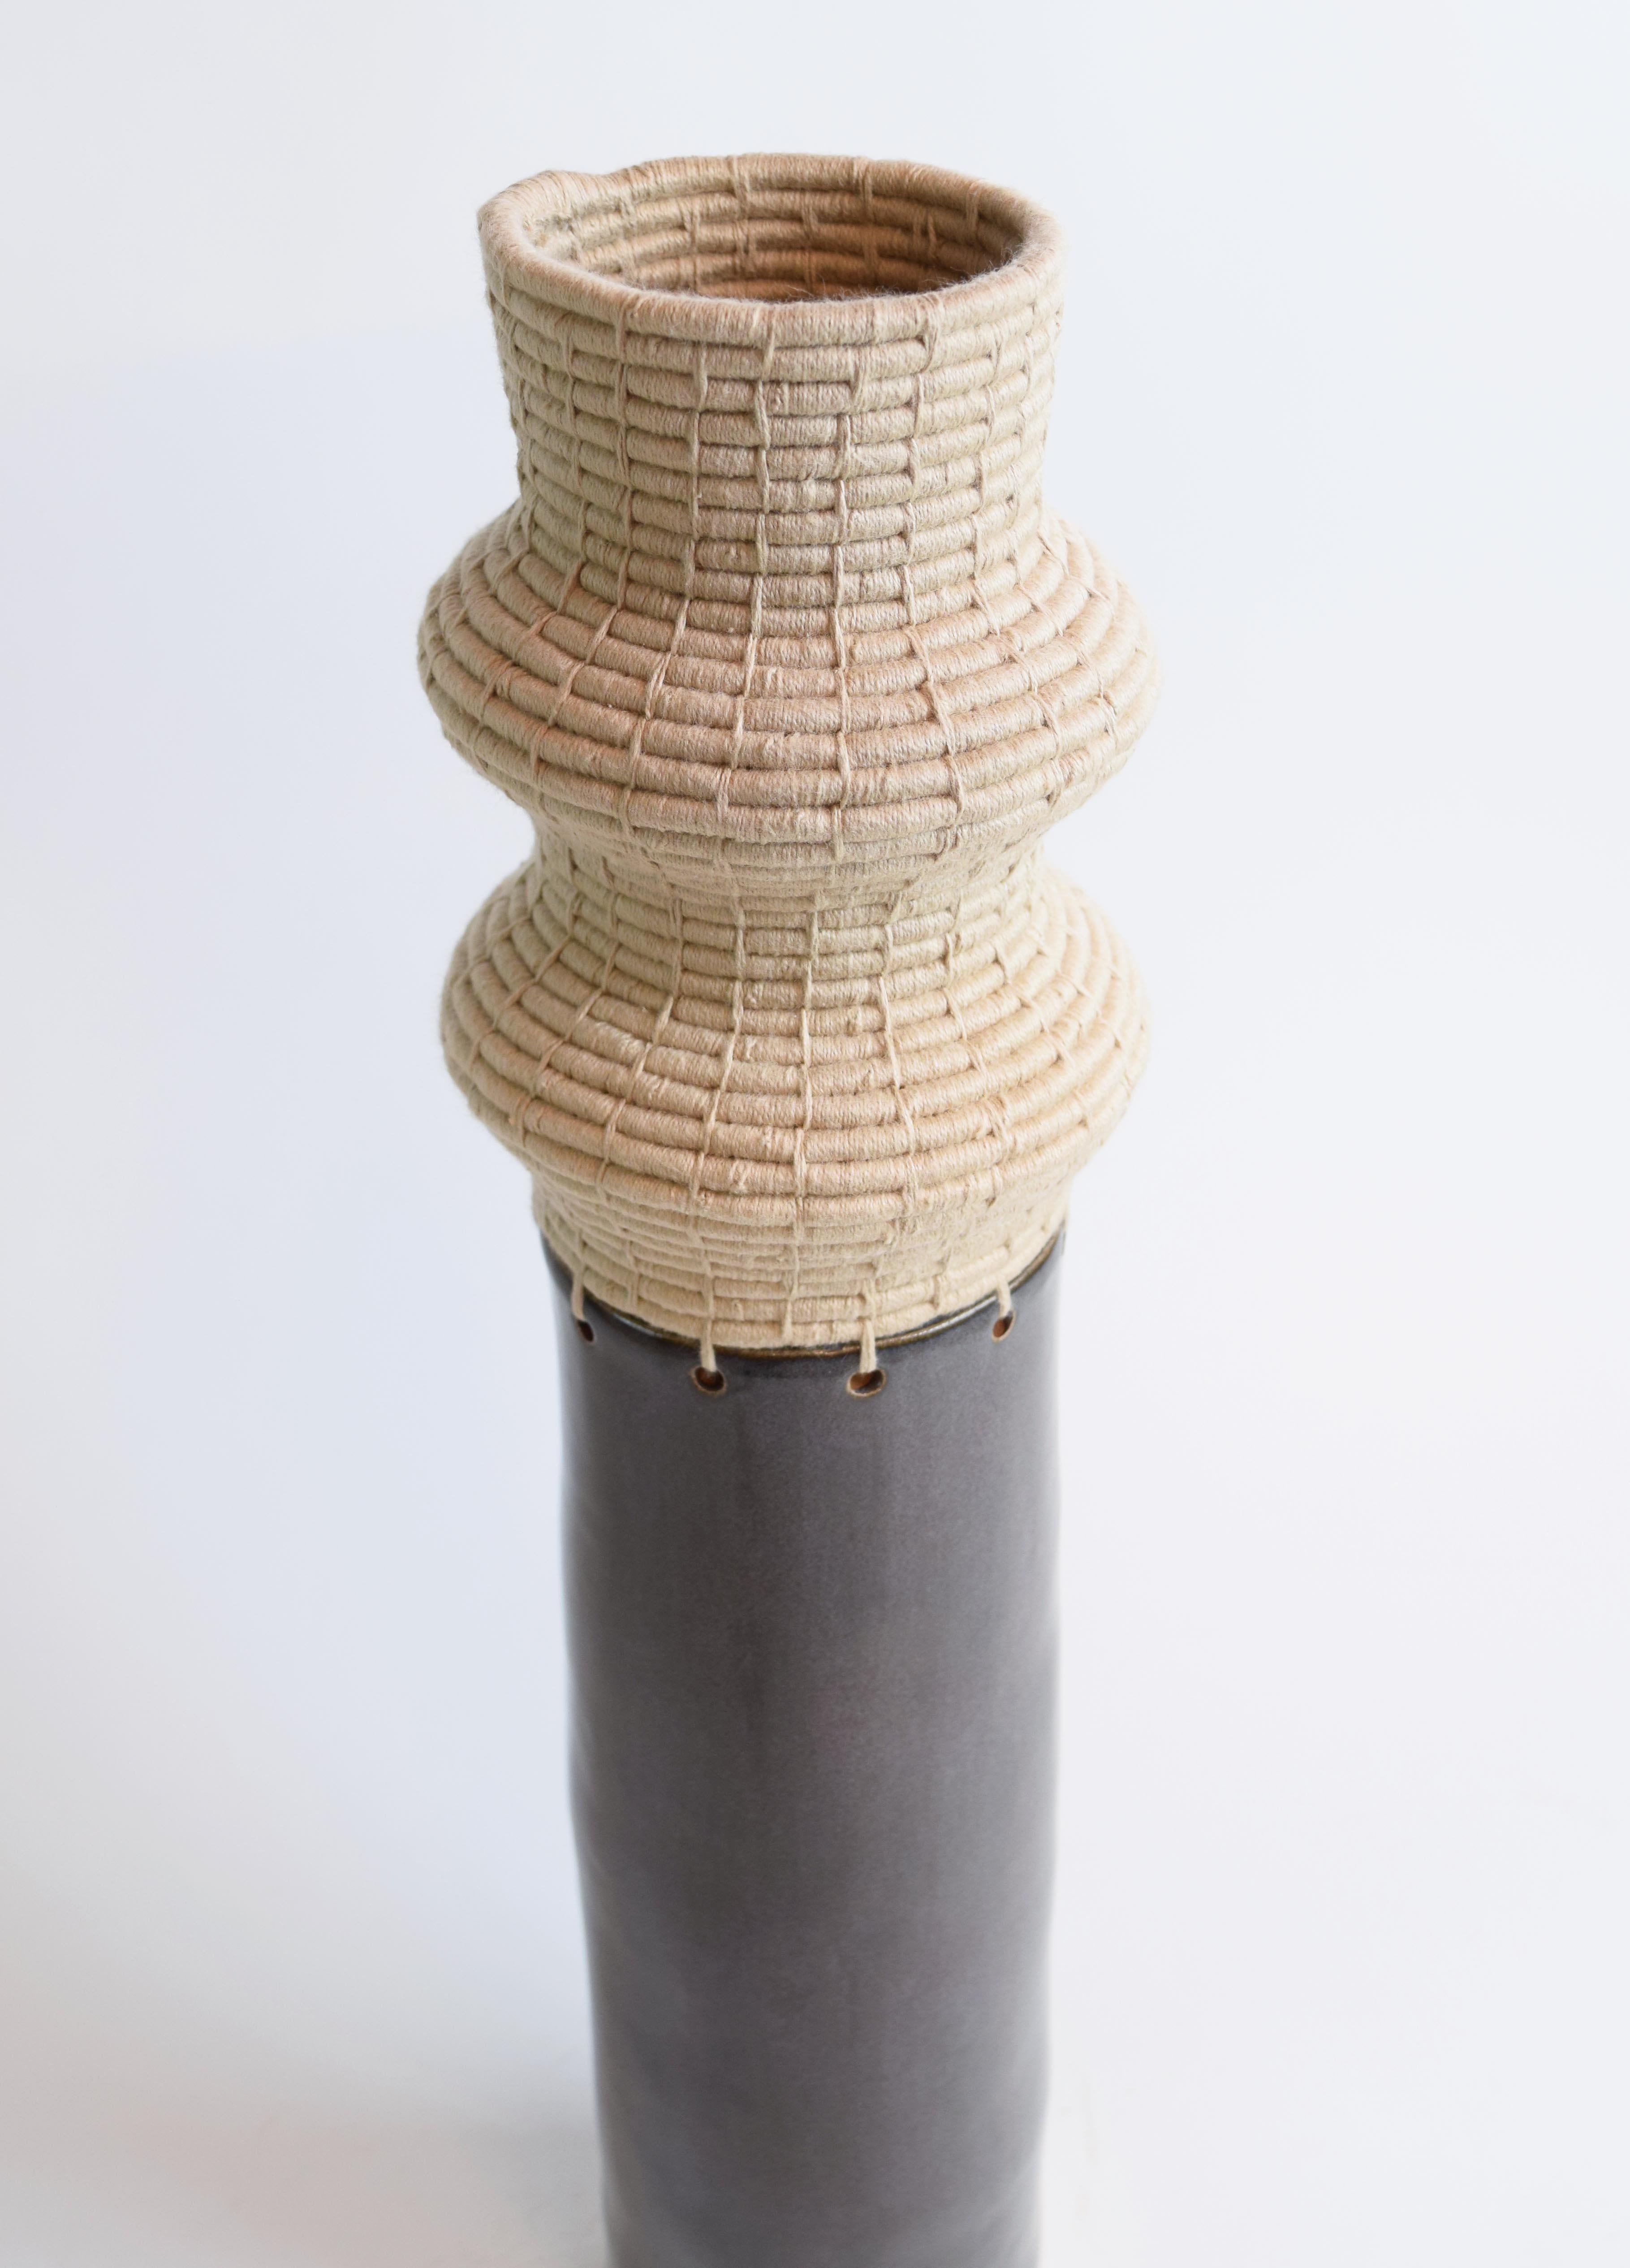 Vessel #814 by Karen Gayle Tinney

Hand formed stoneware base with satin charcoal glaze. The top part is woven in tan cotton.

21.25”H x 4”W

One of a kind collections with a limited number of pieces are released periodically throughout the year.